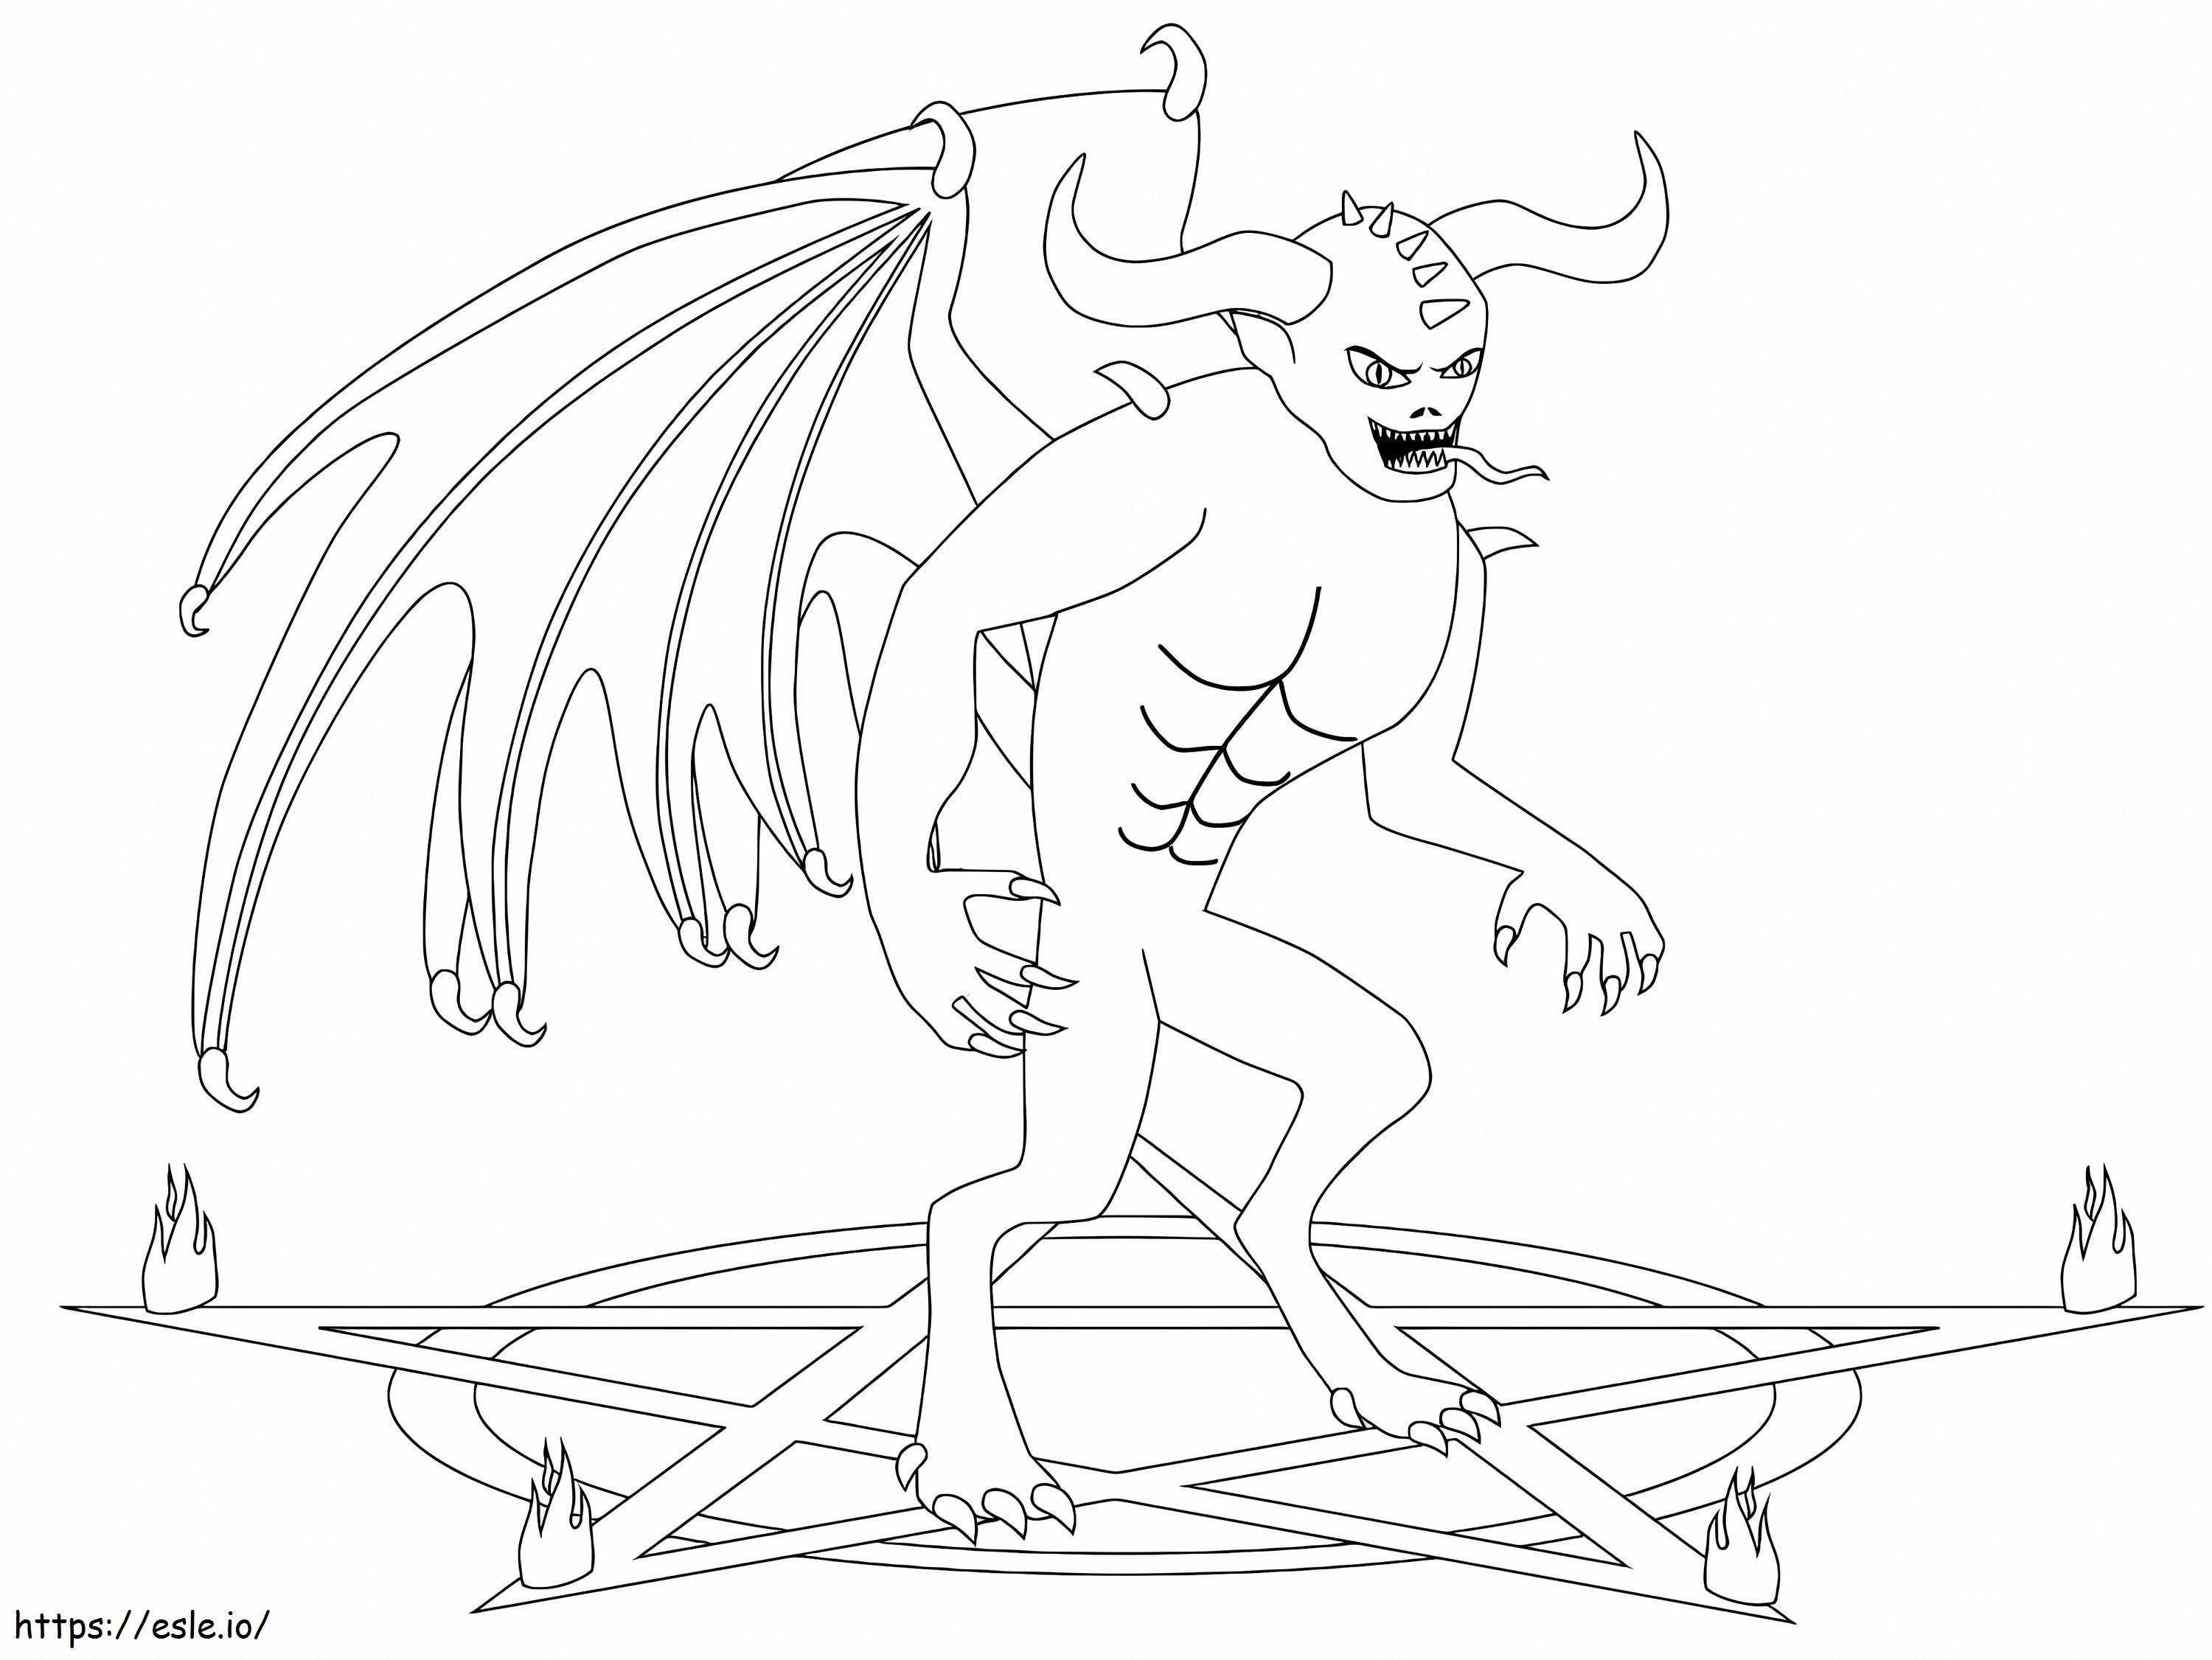 Demon With Long Tongue coloring page